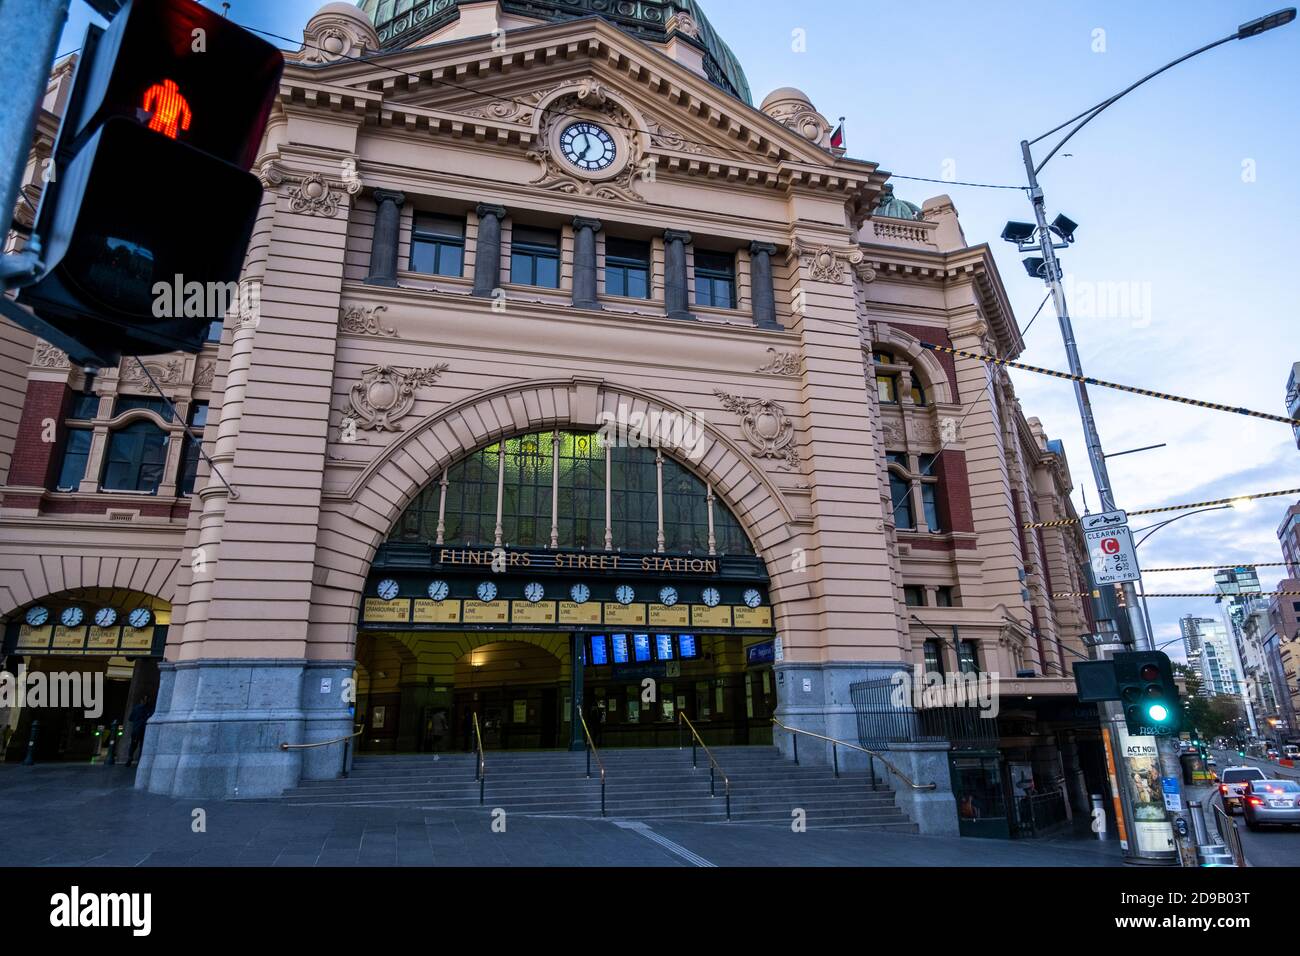 There are hardly any people at Flinders Street station central Melbourne because of the coronavirus lockdown in Australia Stock Photo